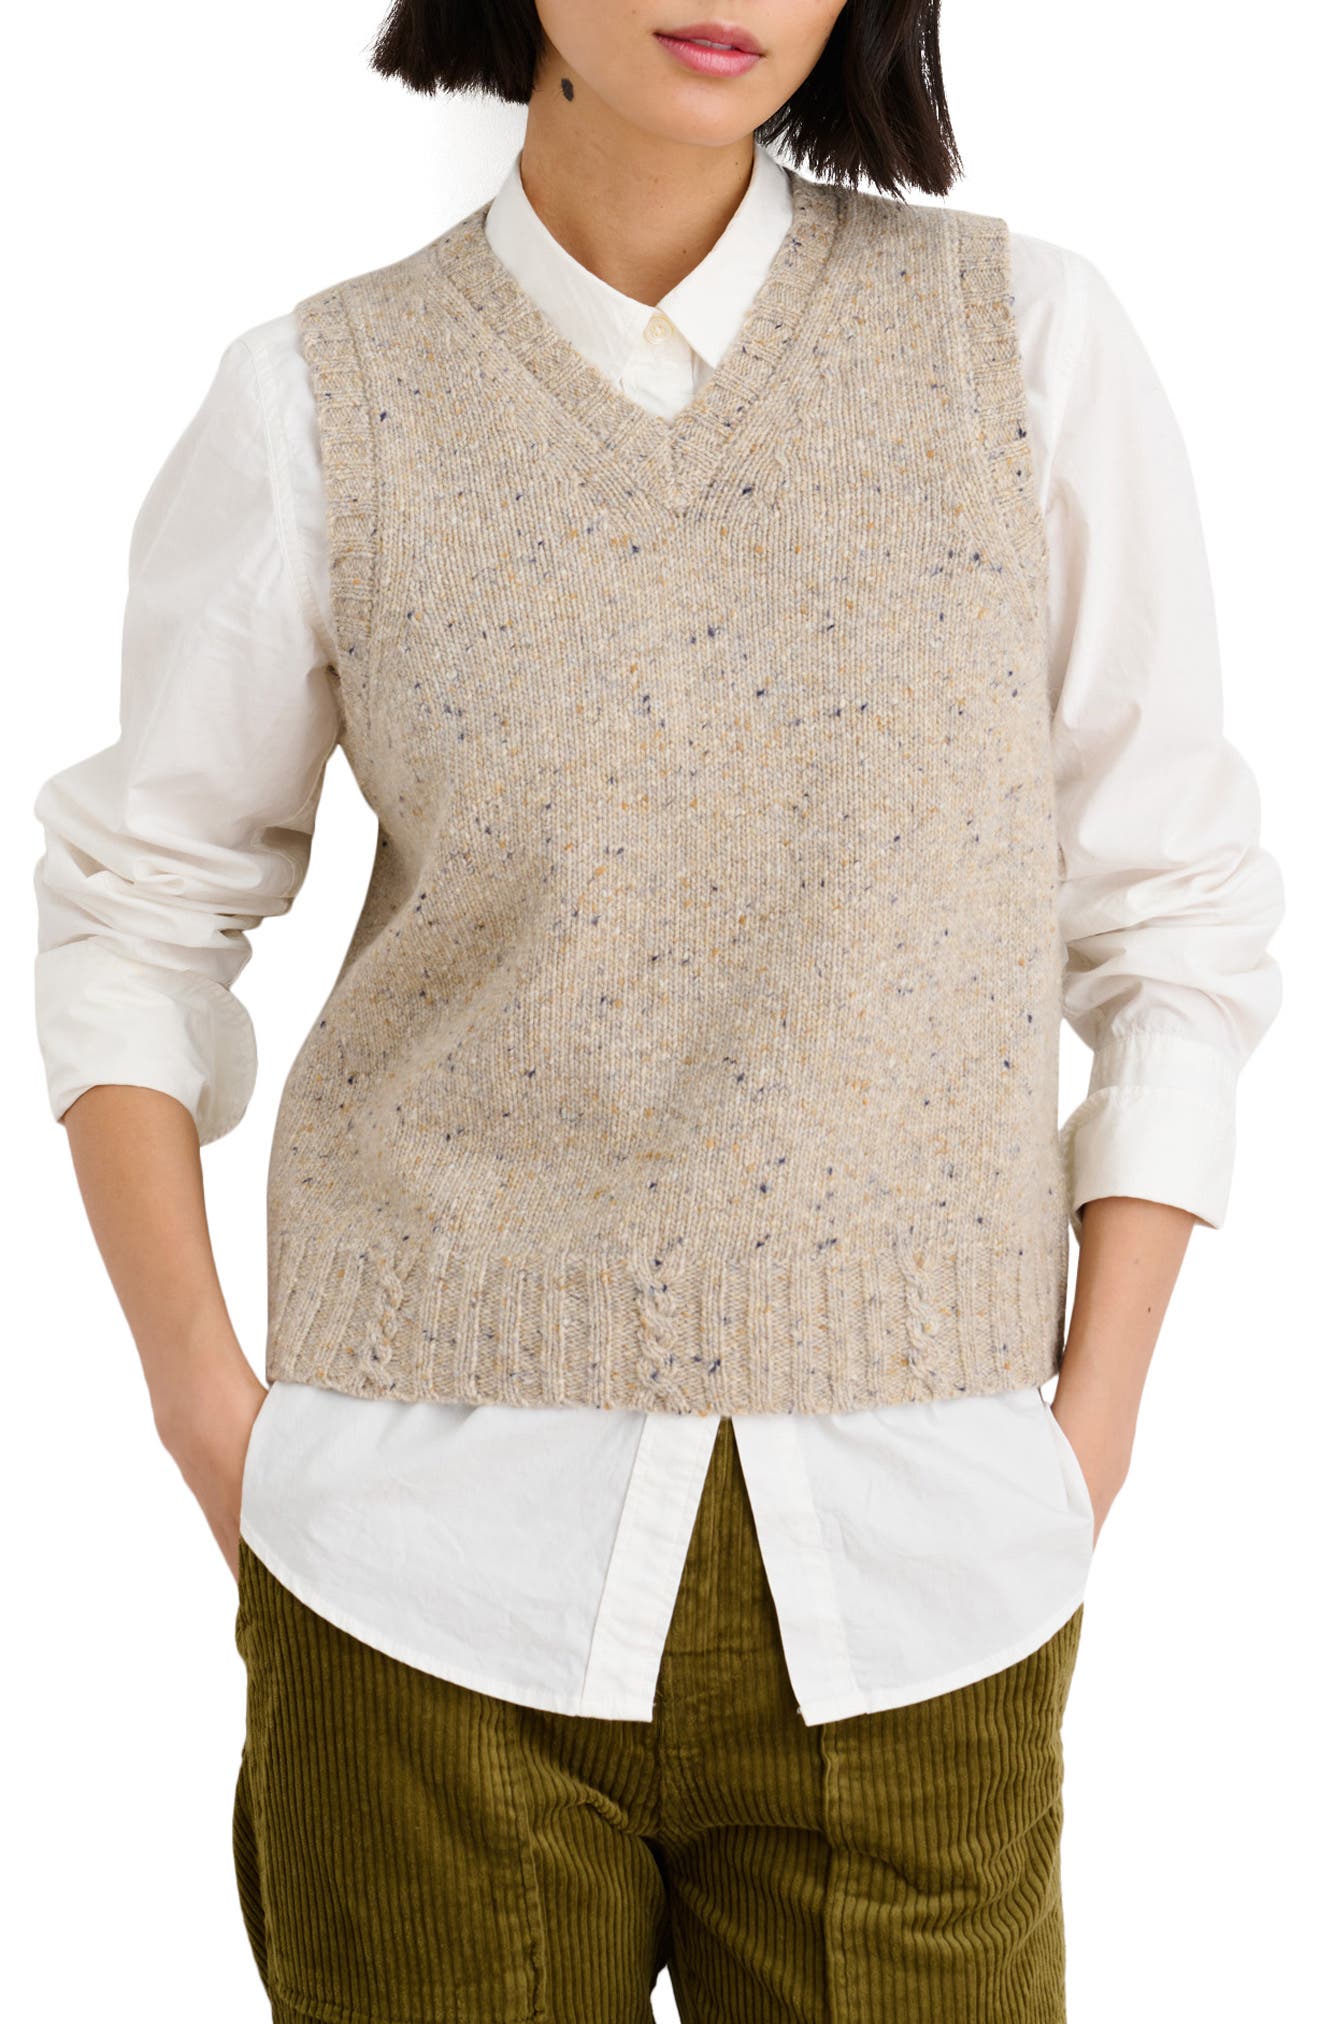 Berna Synthetic Jumper in Camel Womens Clothing Jumpers and knitwear Sleeveless jumpers Natural 